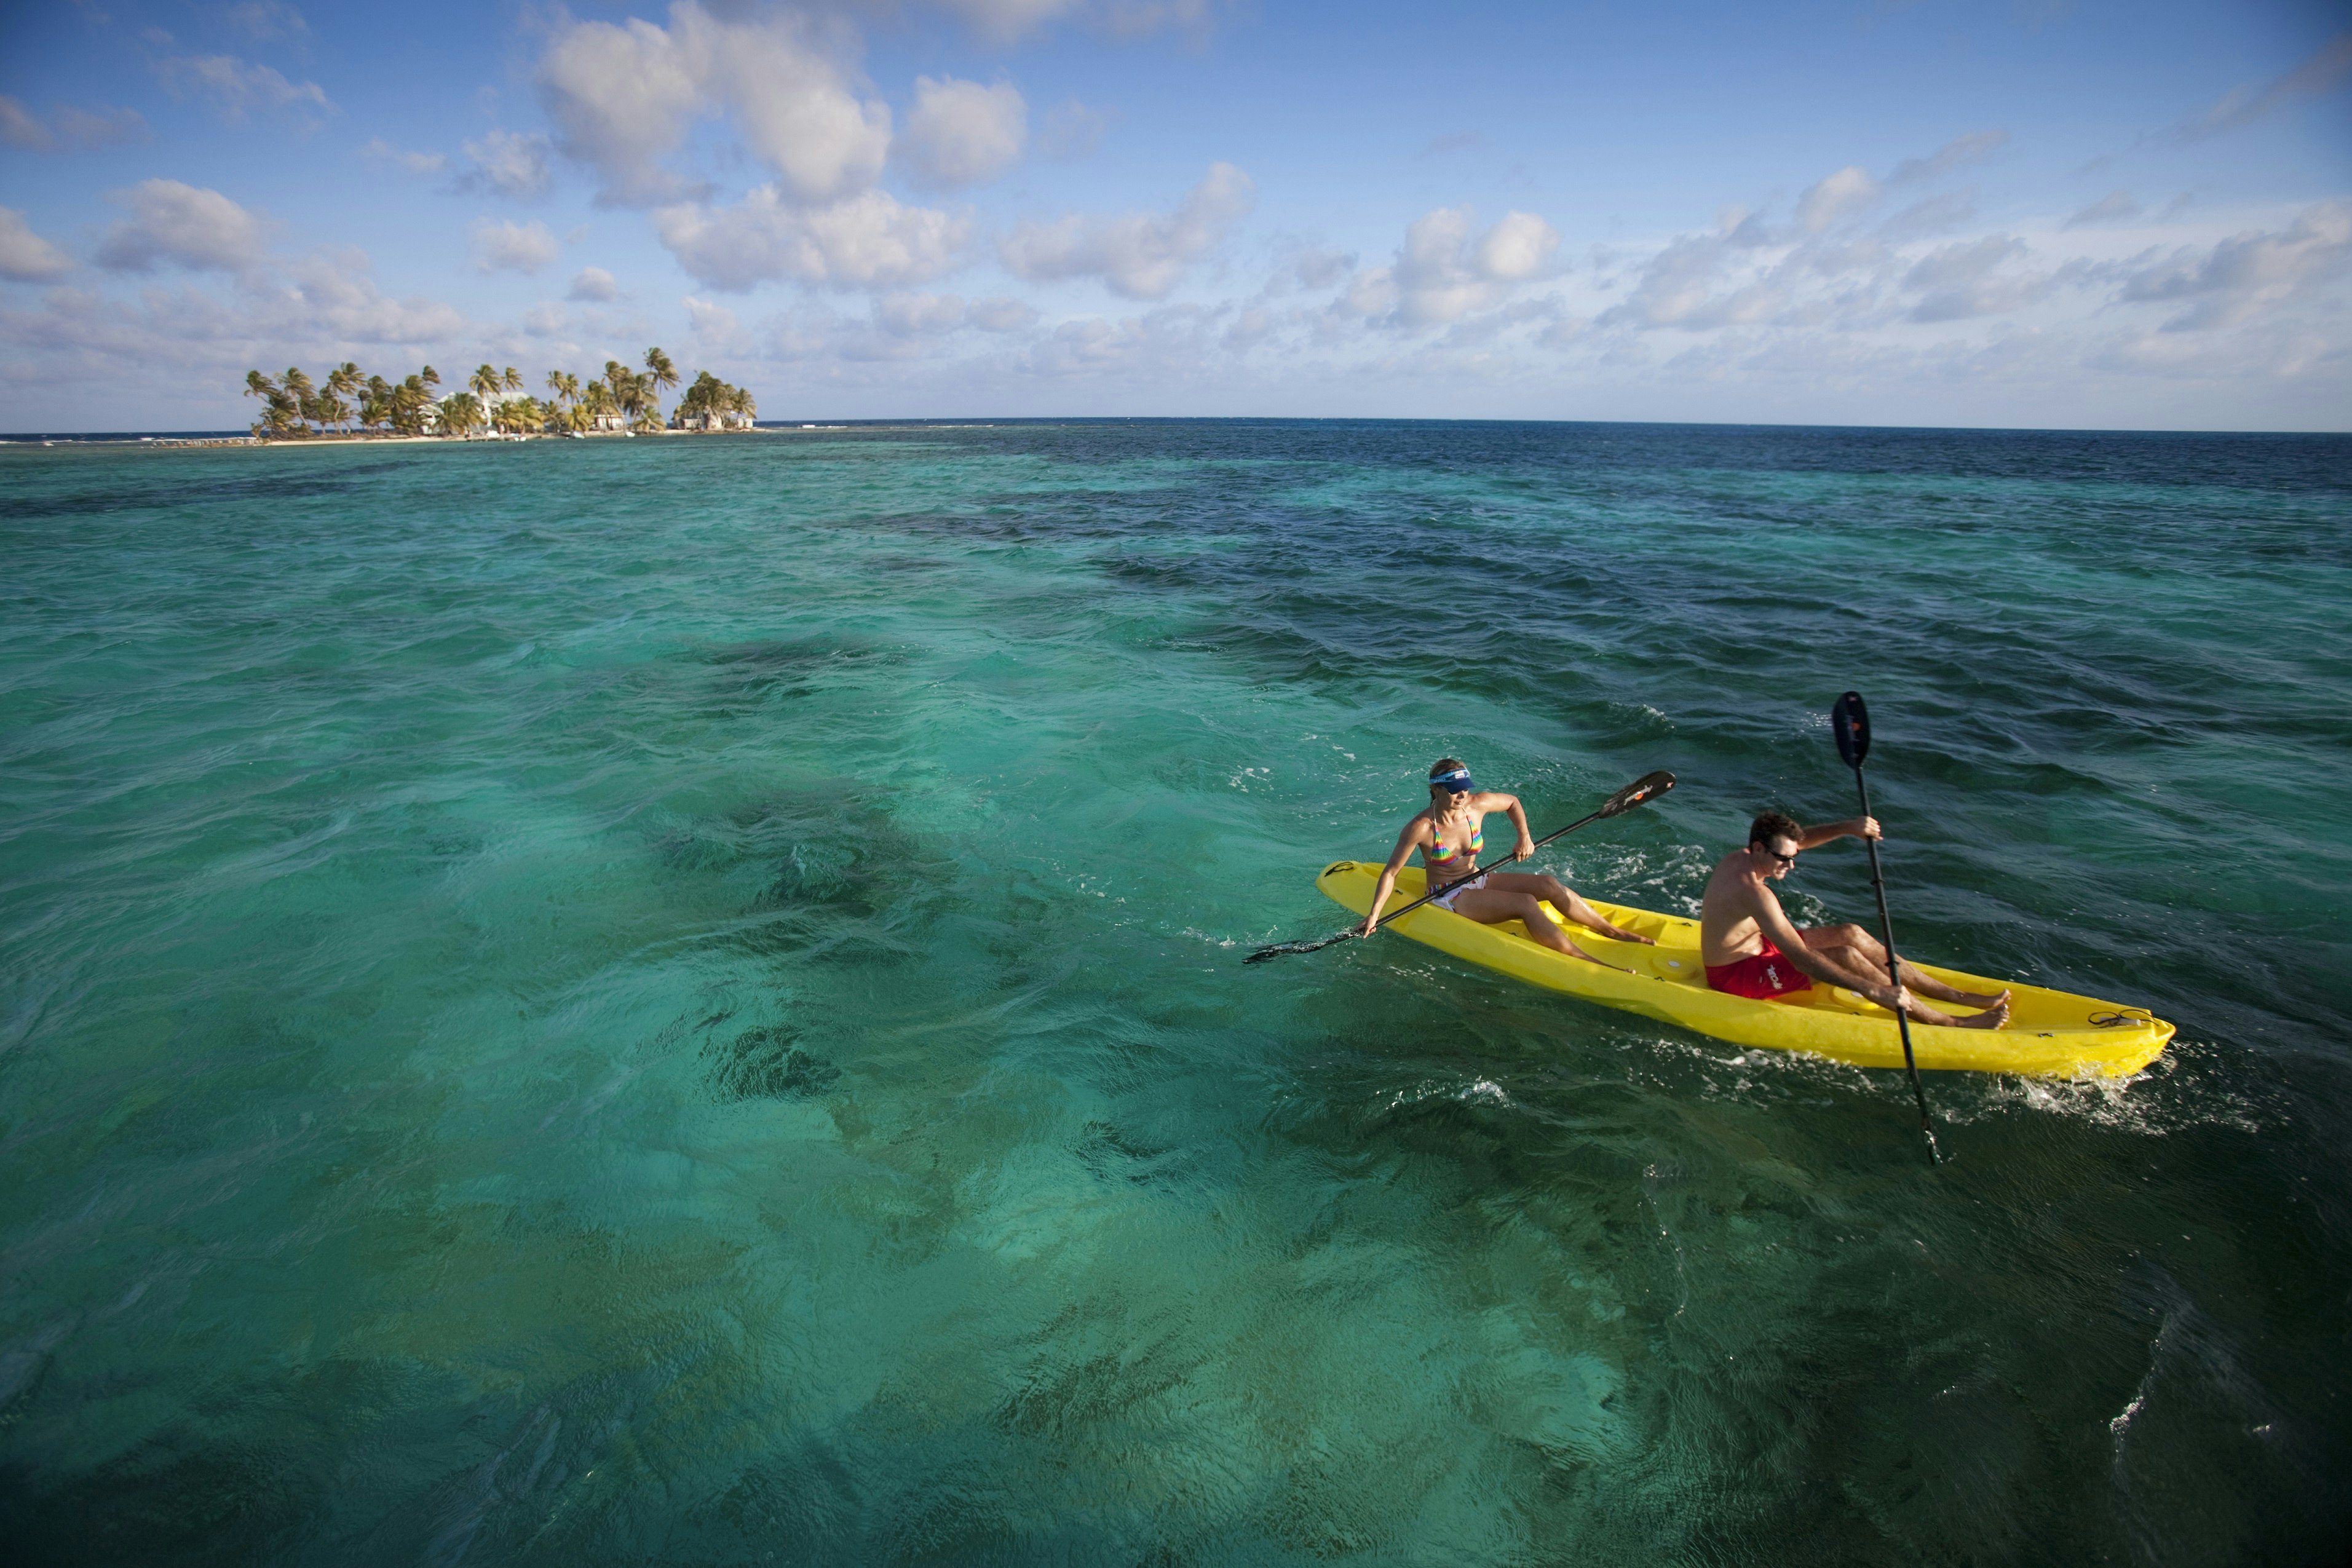 A man and woman wearing swimsuits sit in an open-topped kayak and paddle away from a small island in tropical waters